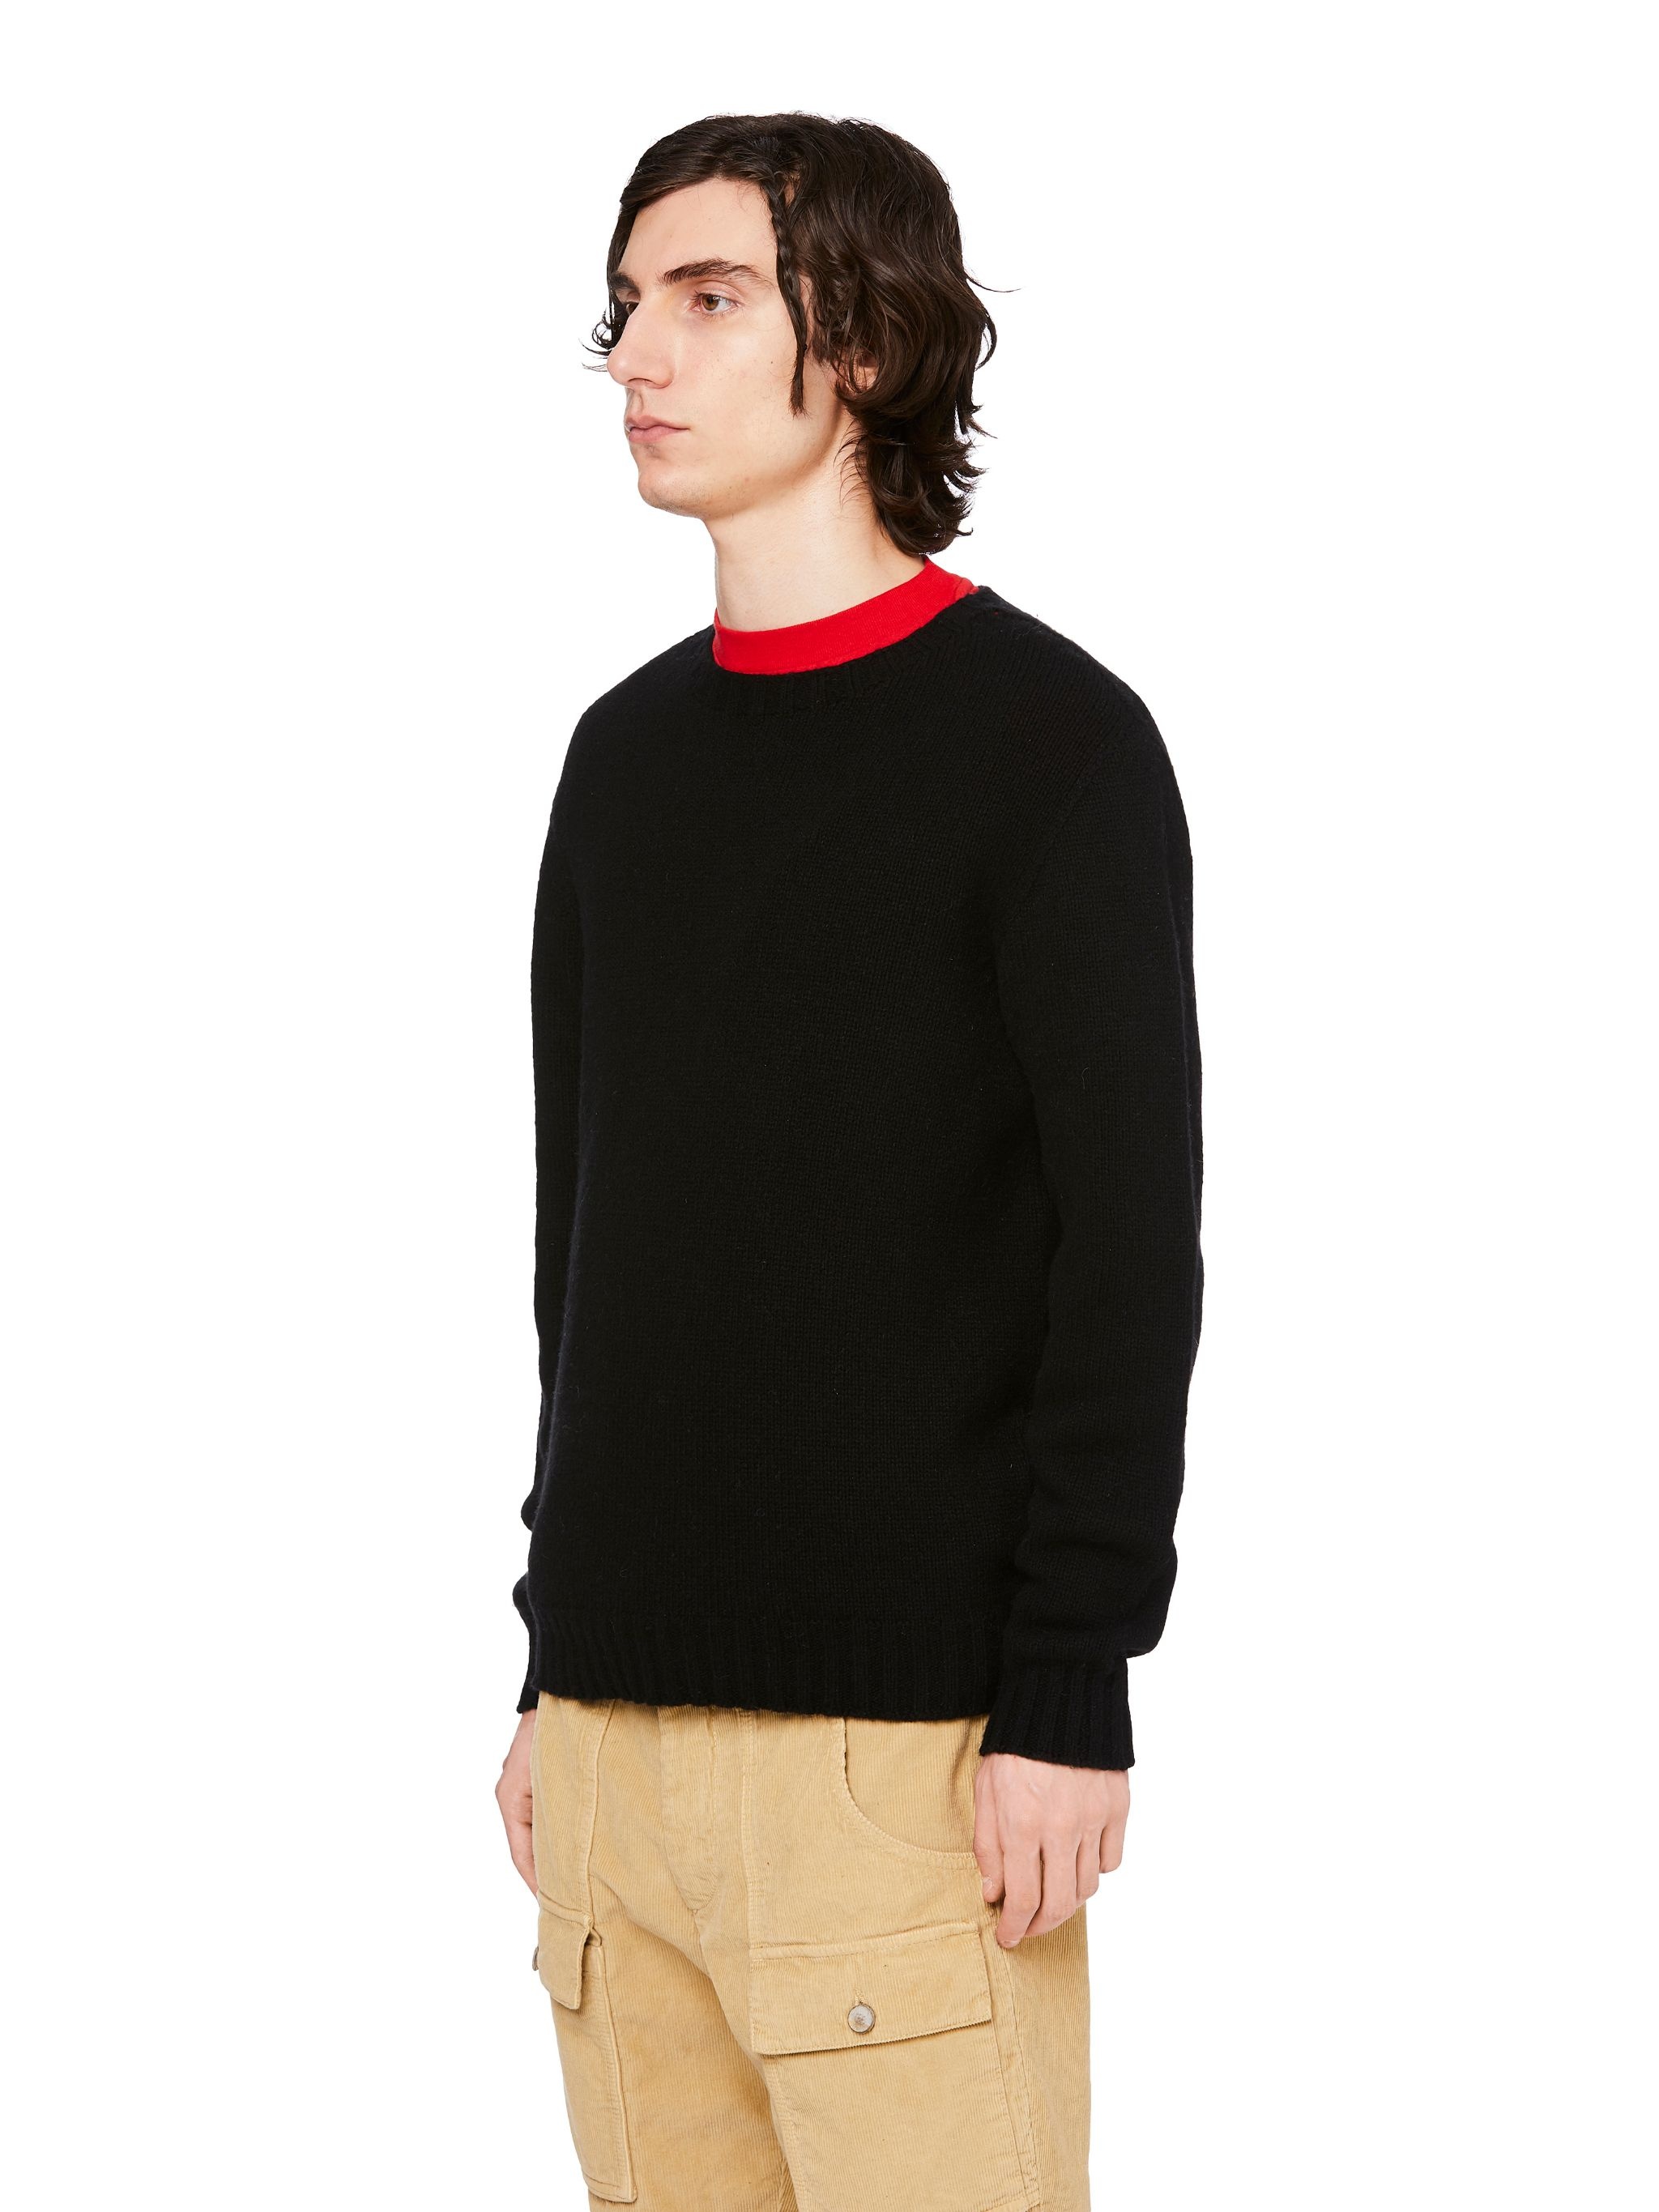 CURVED LOGO SWEATER - 4